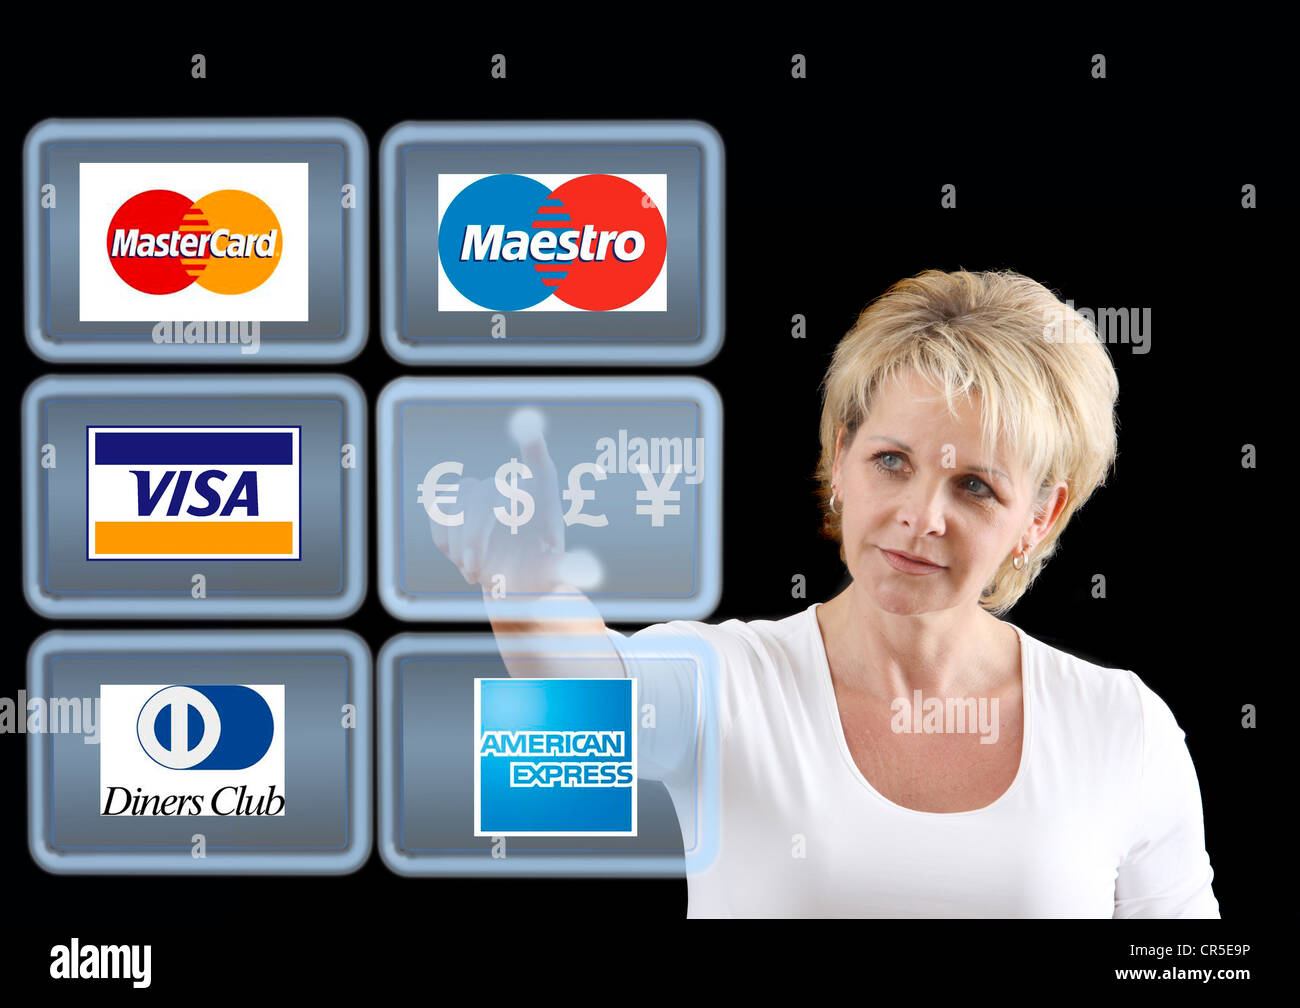 Virtual screens, touch screens. Credit card companies. Symbolic Image. Stock Photo